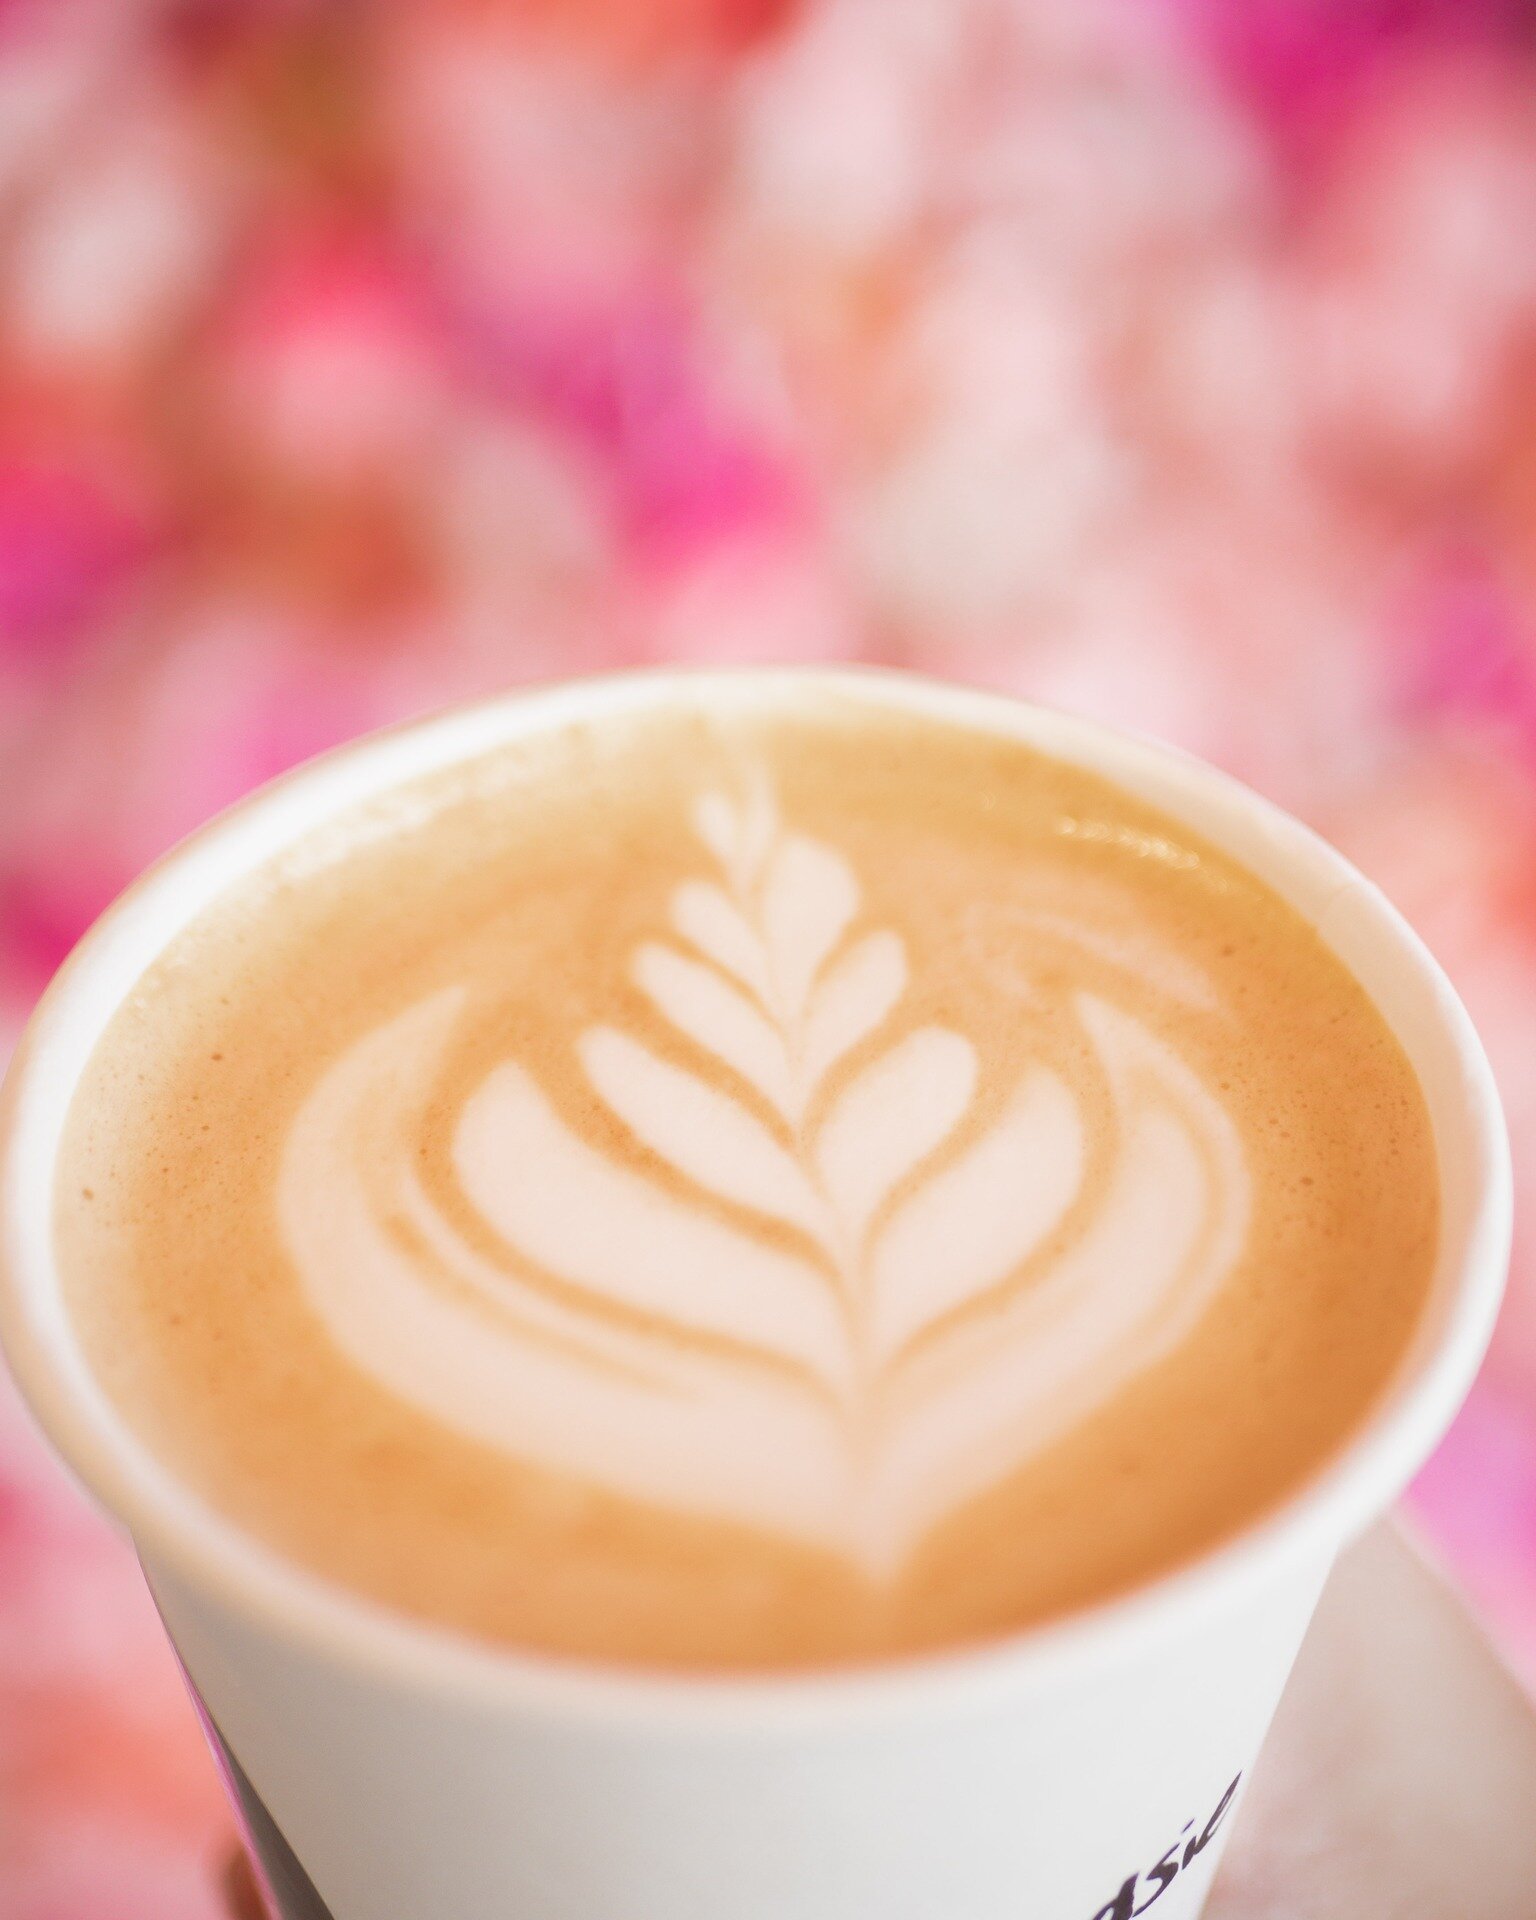 Happy Valentine's Day! 🫶

Share this if coffee is your Valentine today 😍☕